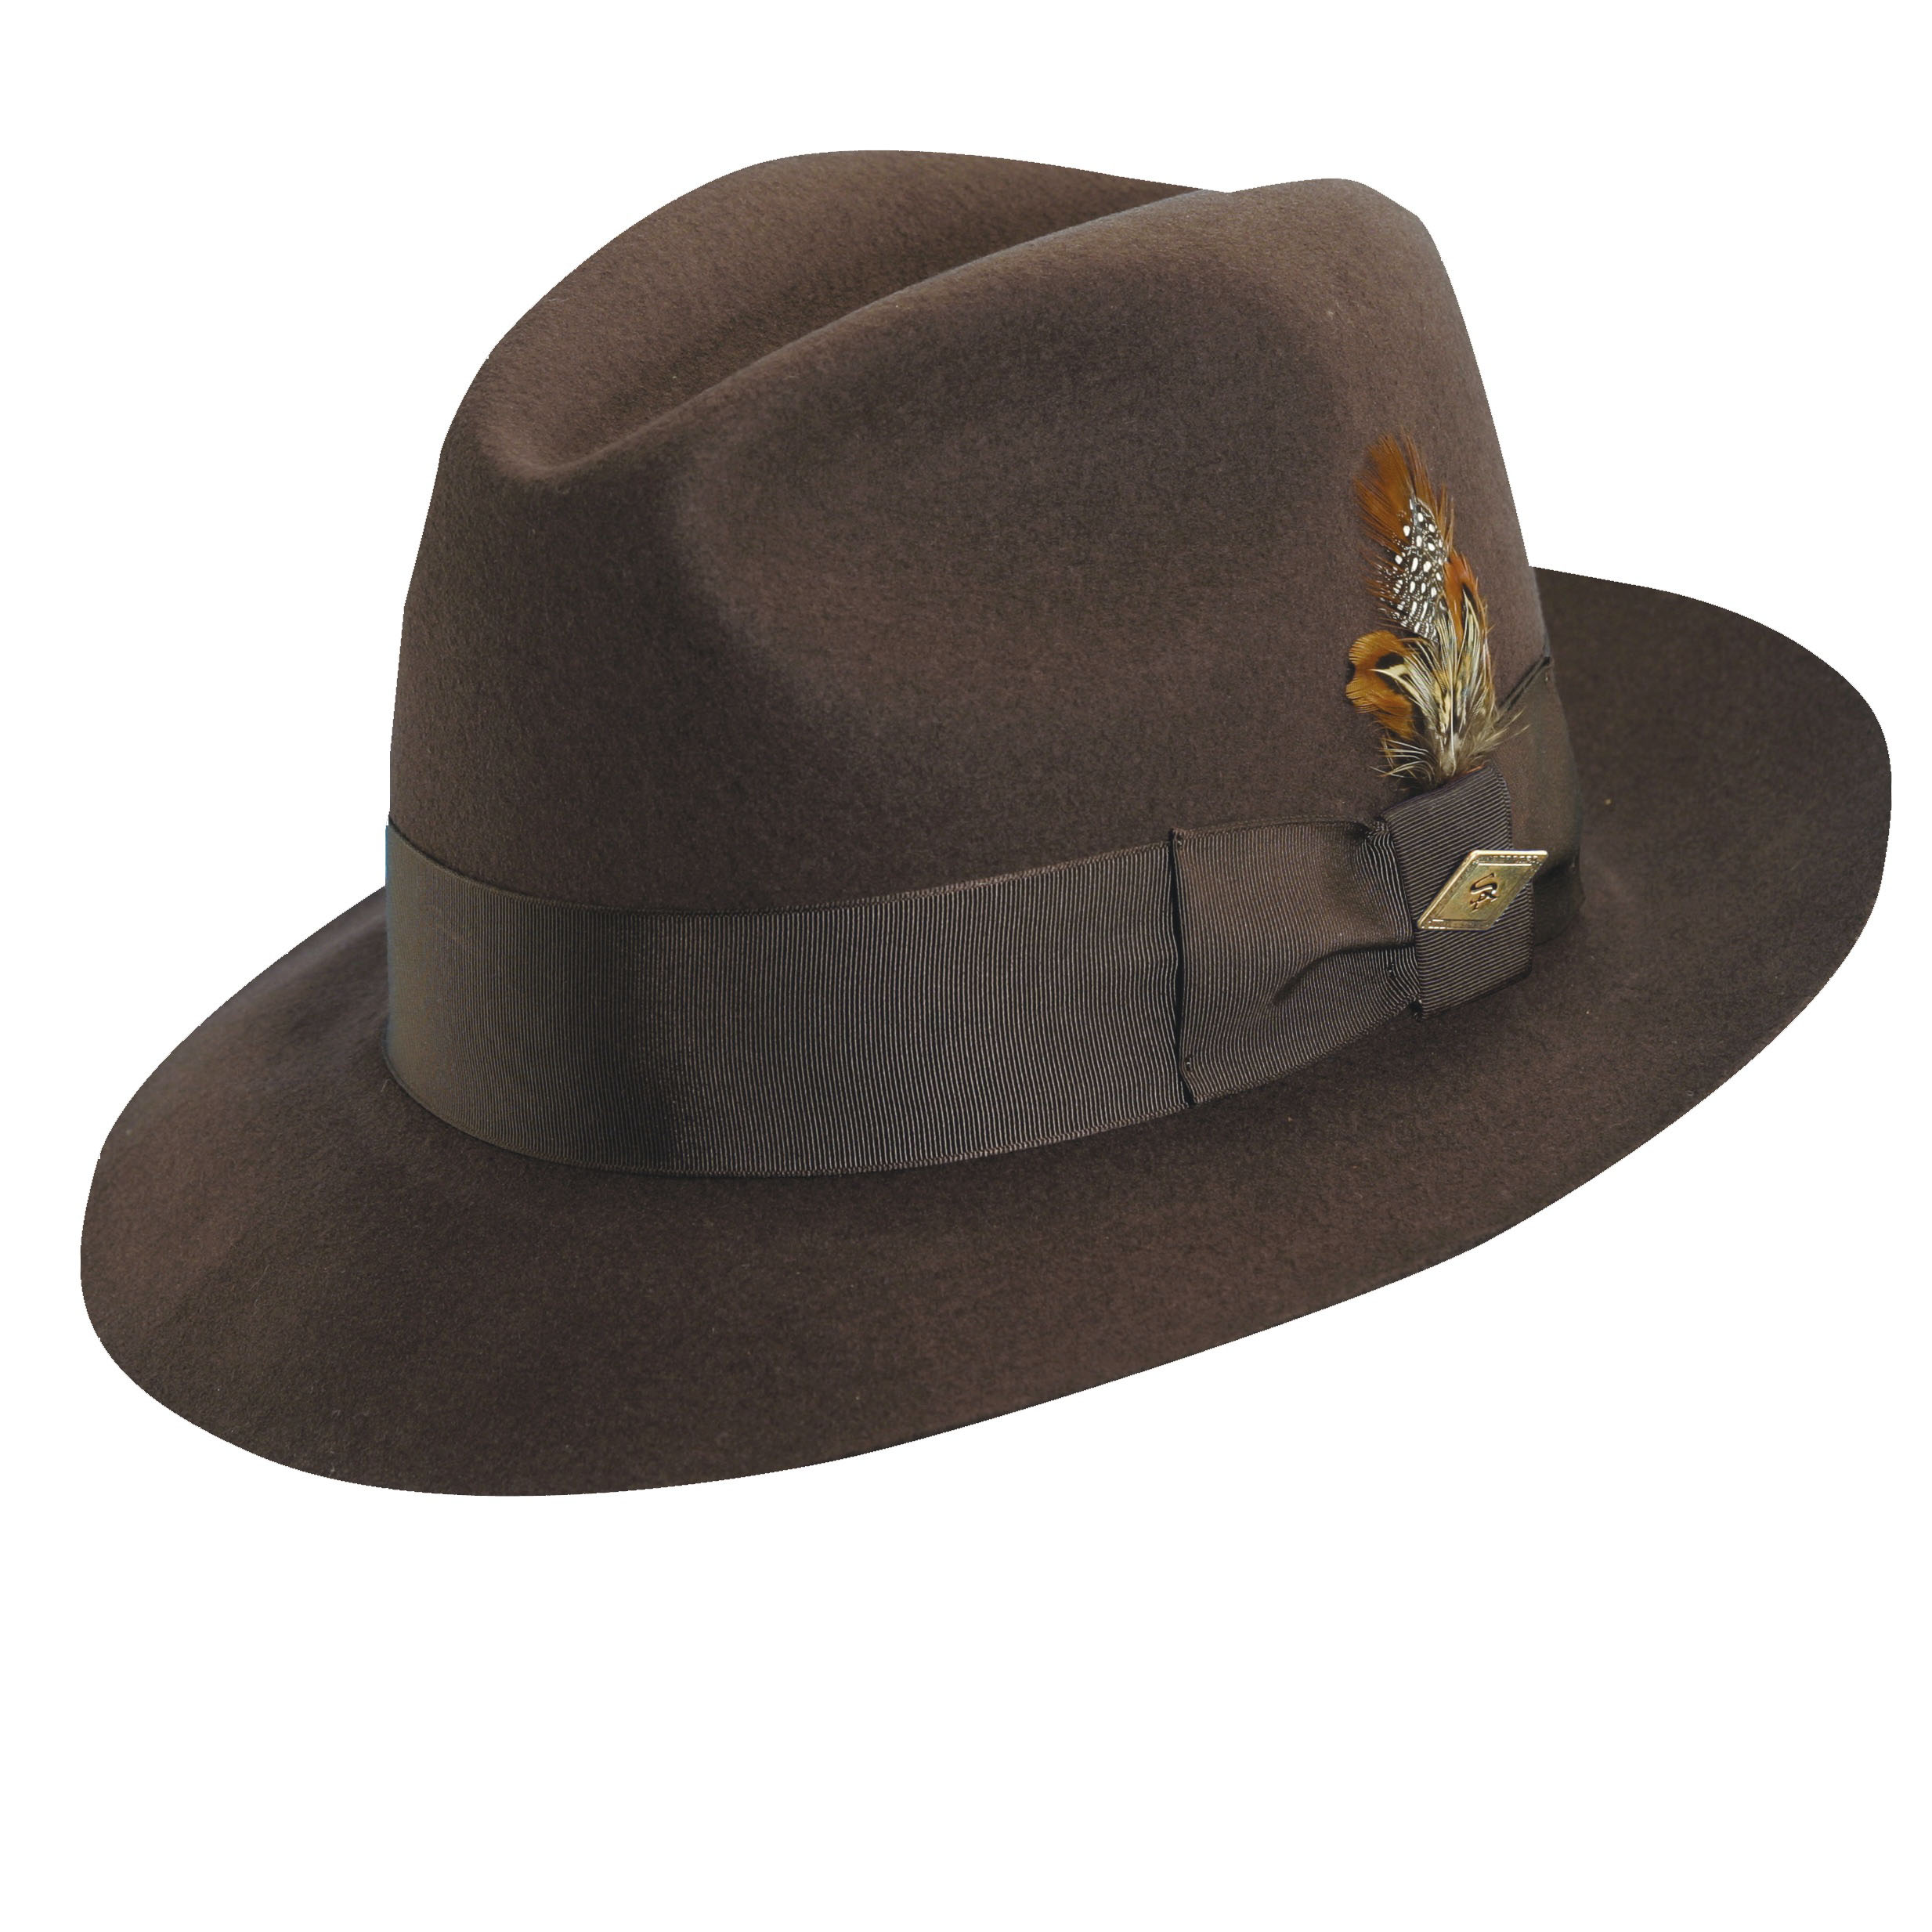 Men's Stacy Adams Wool Felt Fedora With Feather